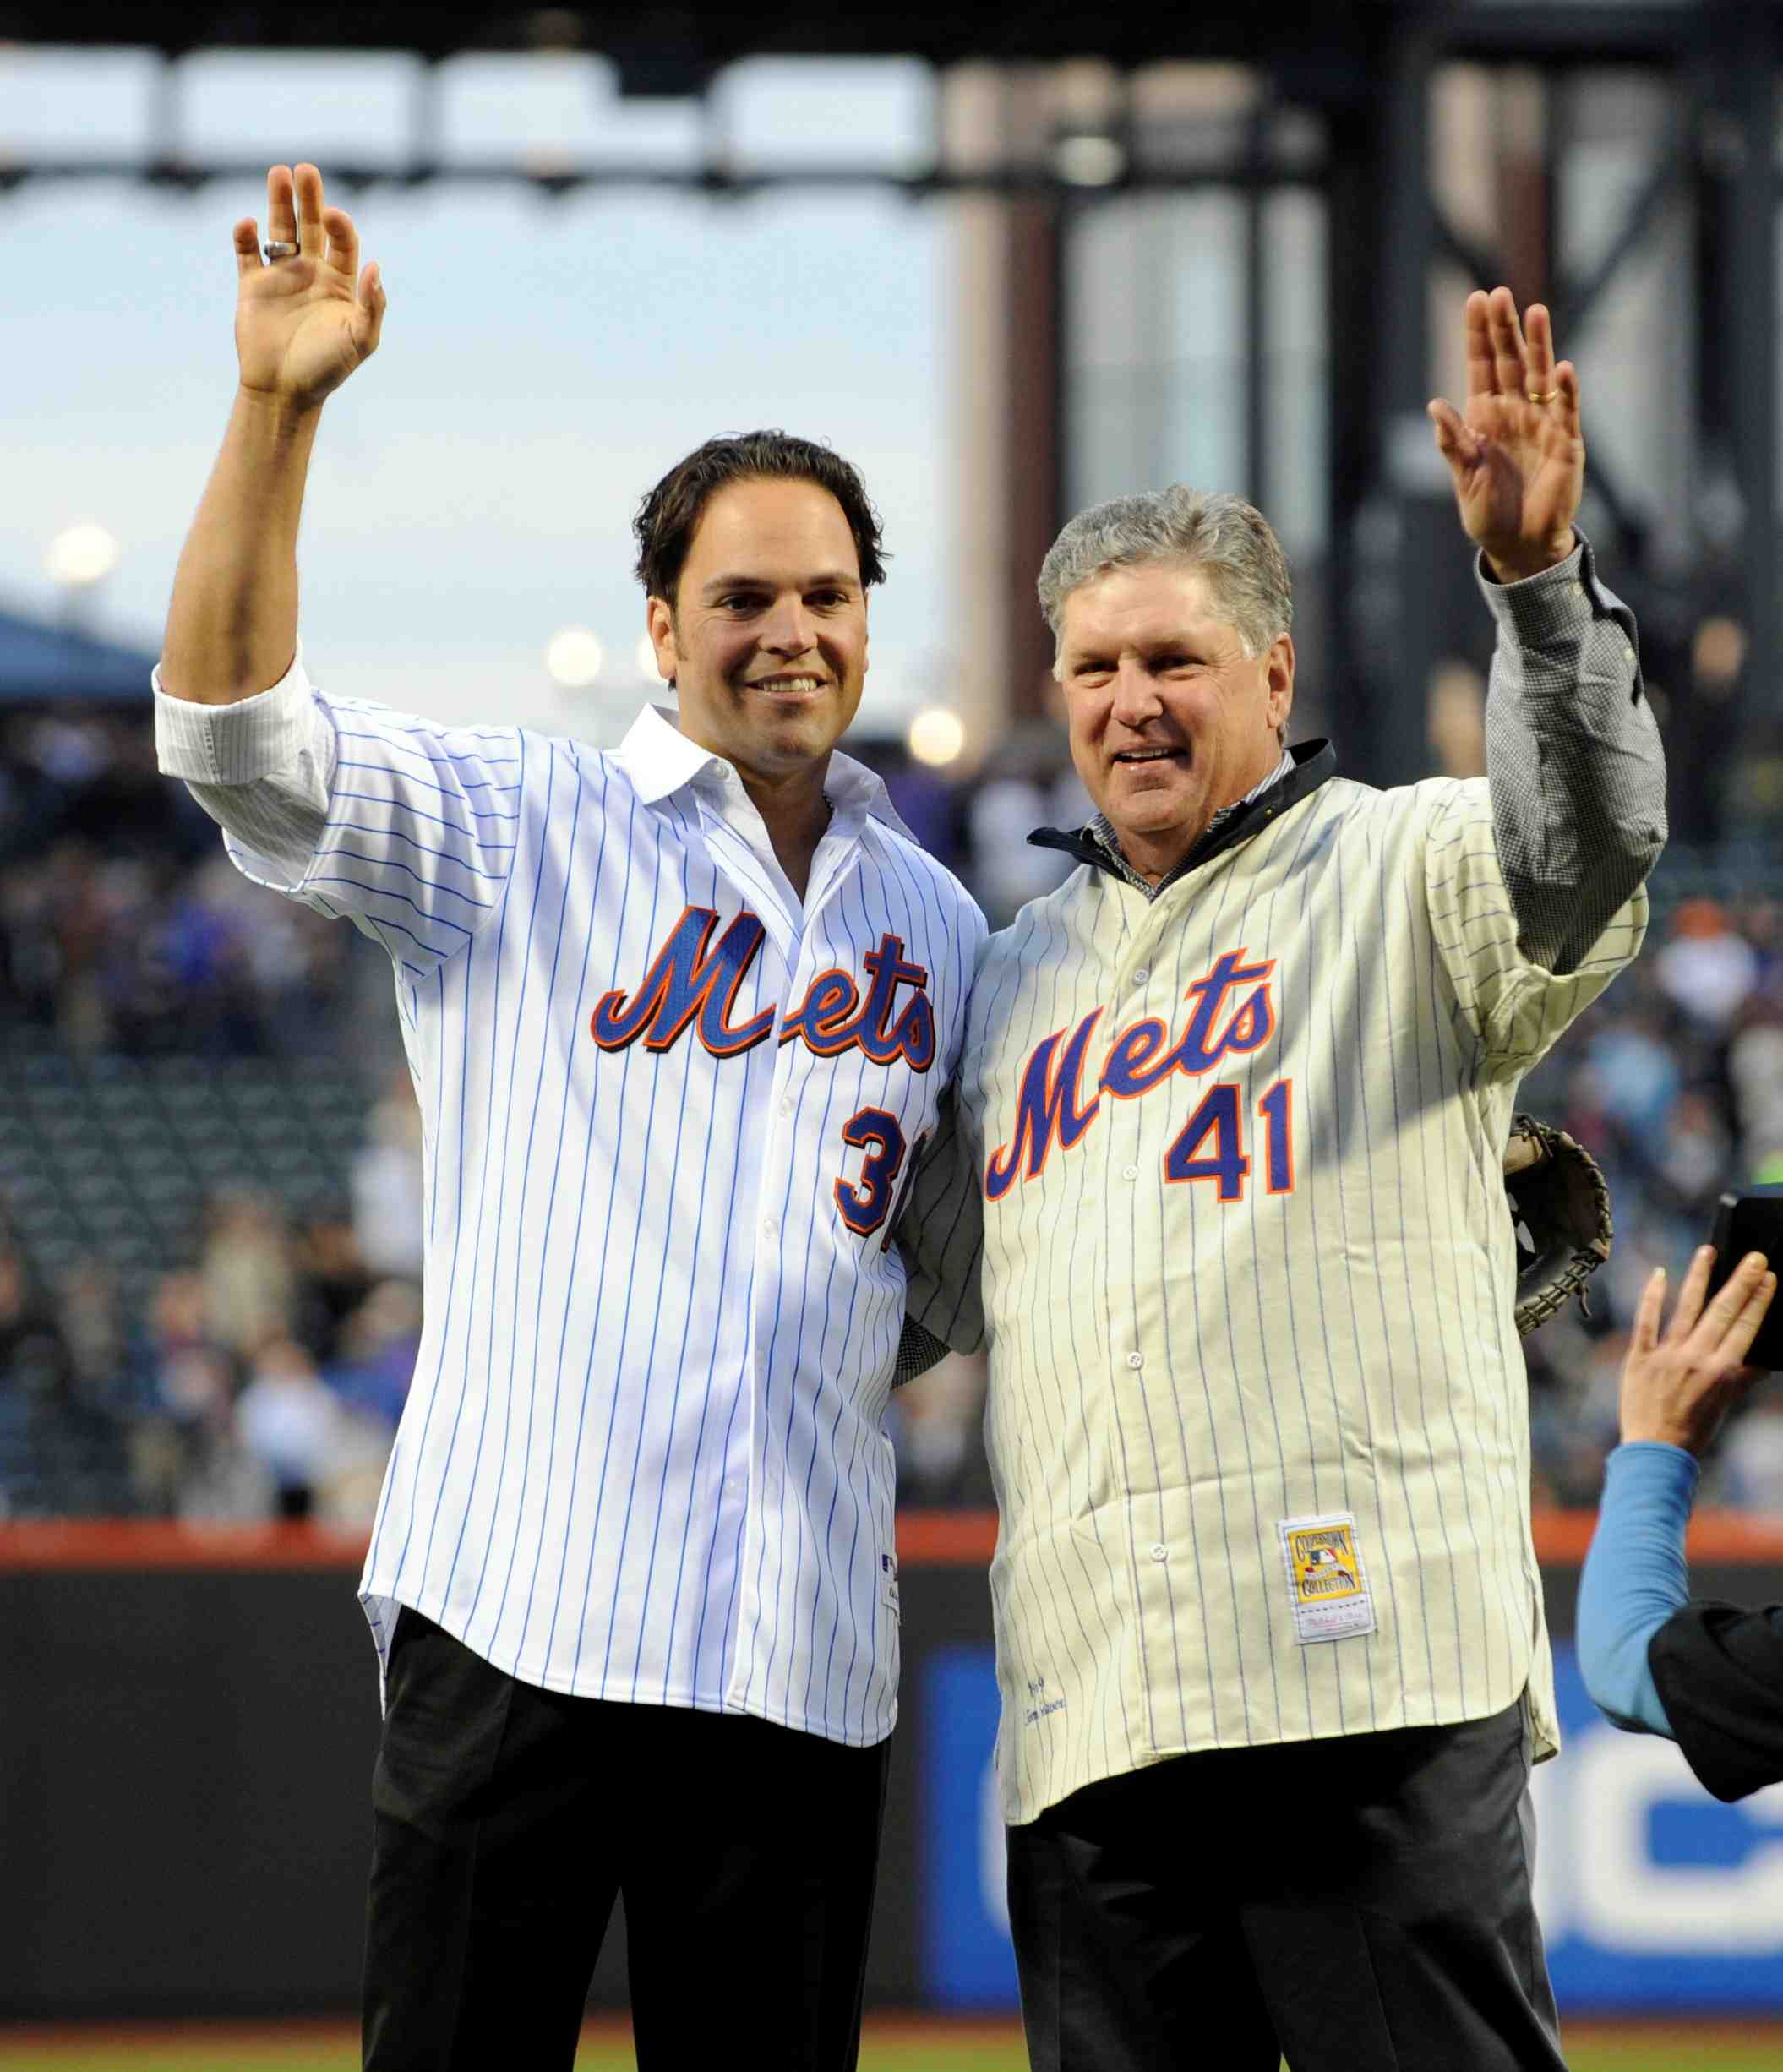 Mike Piazza discusses the life and career of Tom Seaver